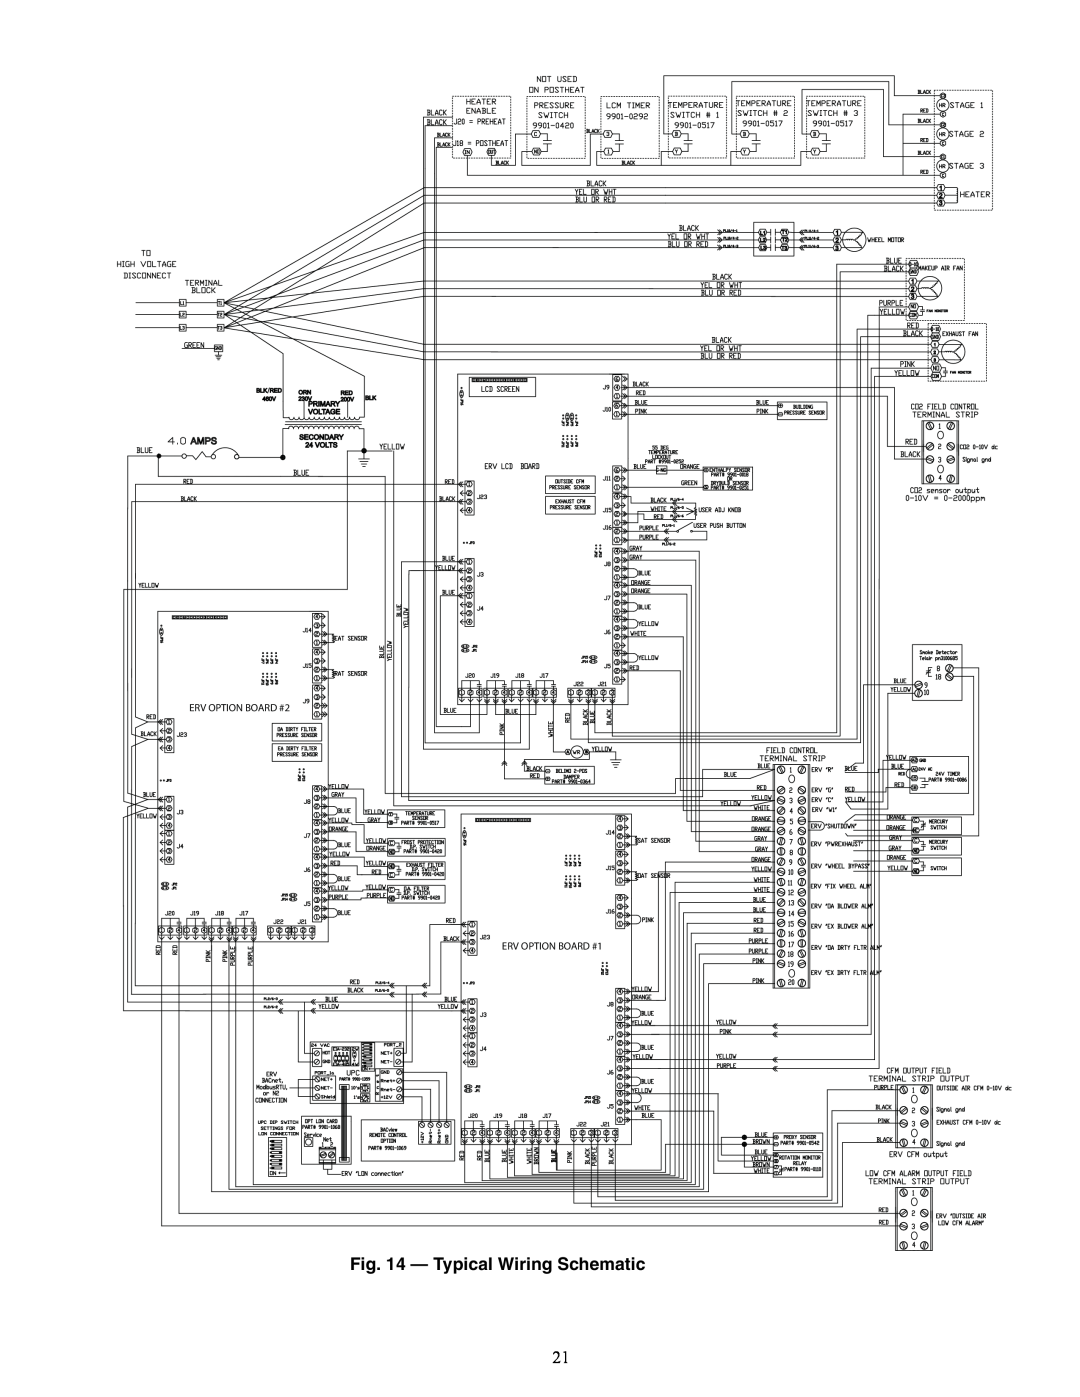 Carrier 62E specifications Typical Wiring Schematic, ERV OPTION BOARD #2, ERV OPTION BOARD #1 